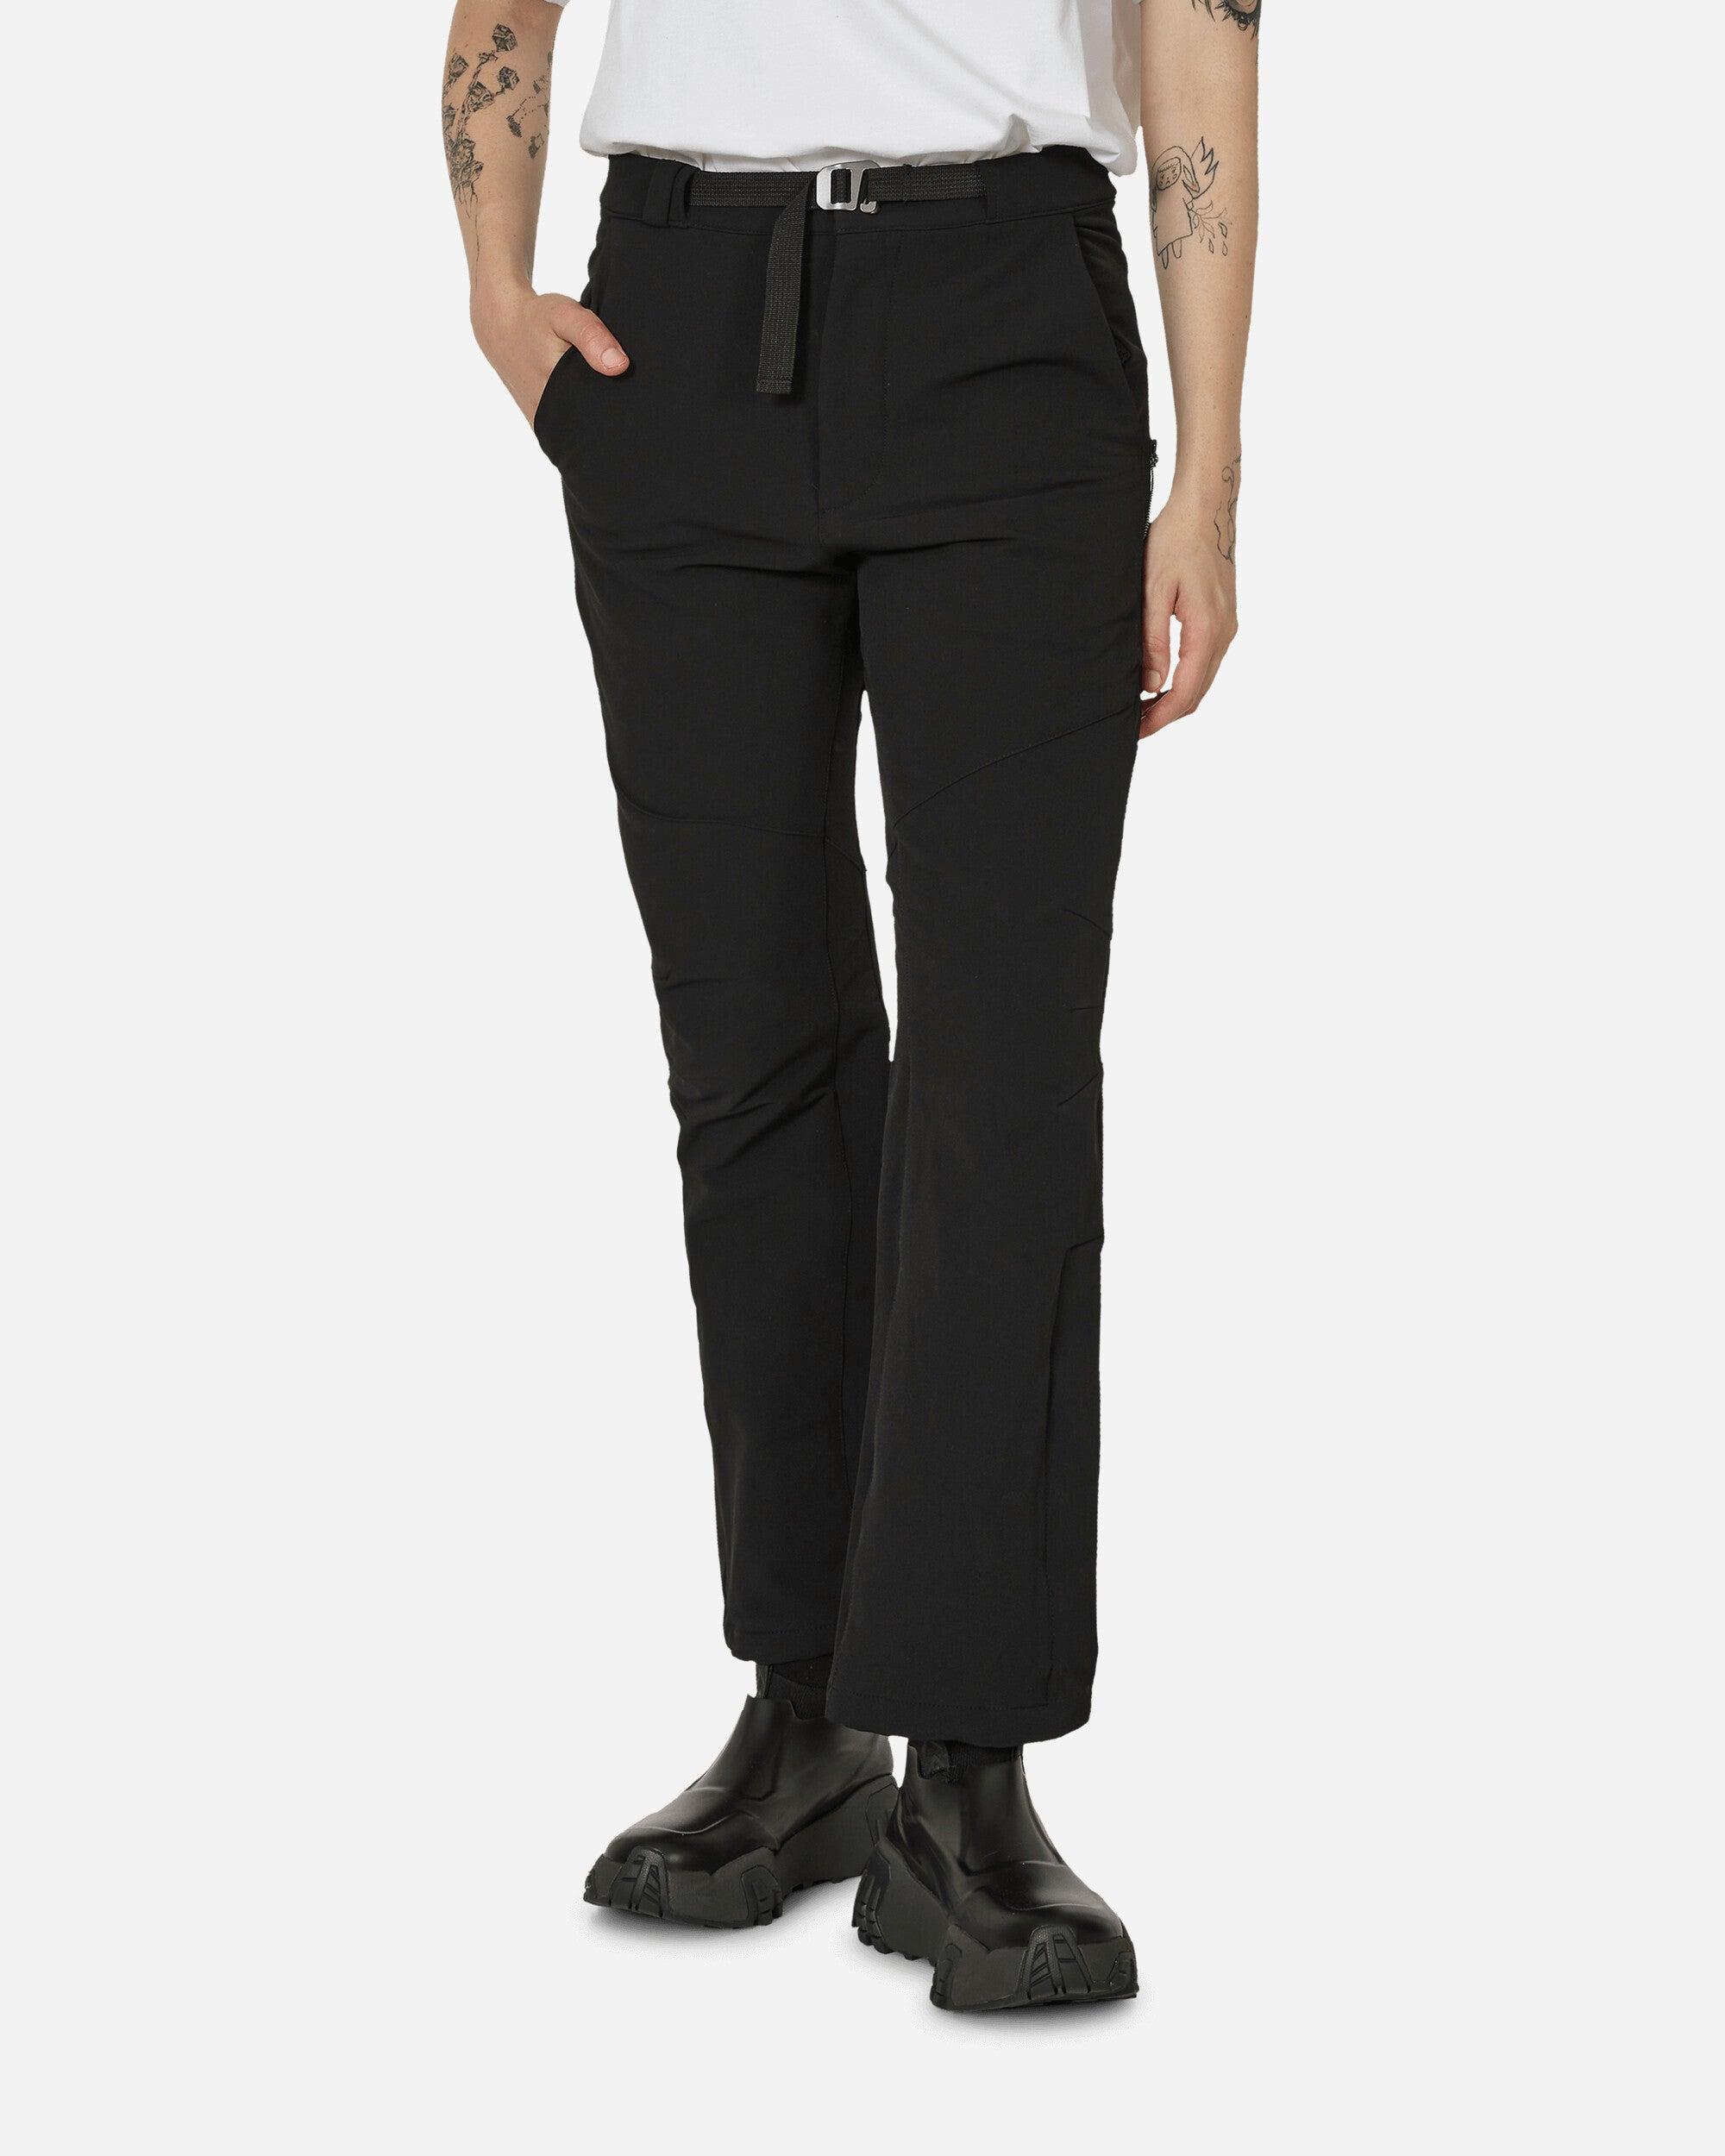 Roa Softshell Technical Trousers in Black | Lyst